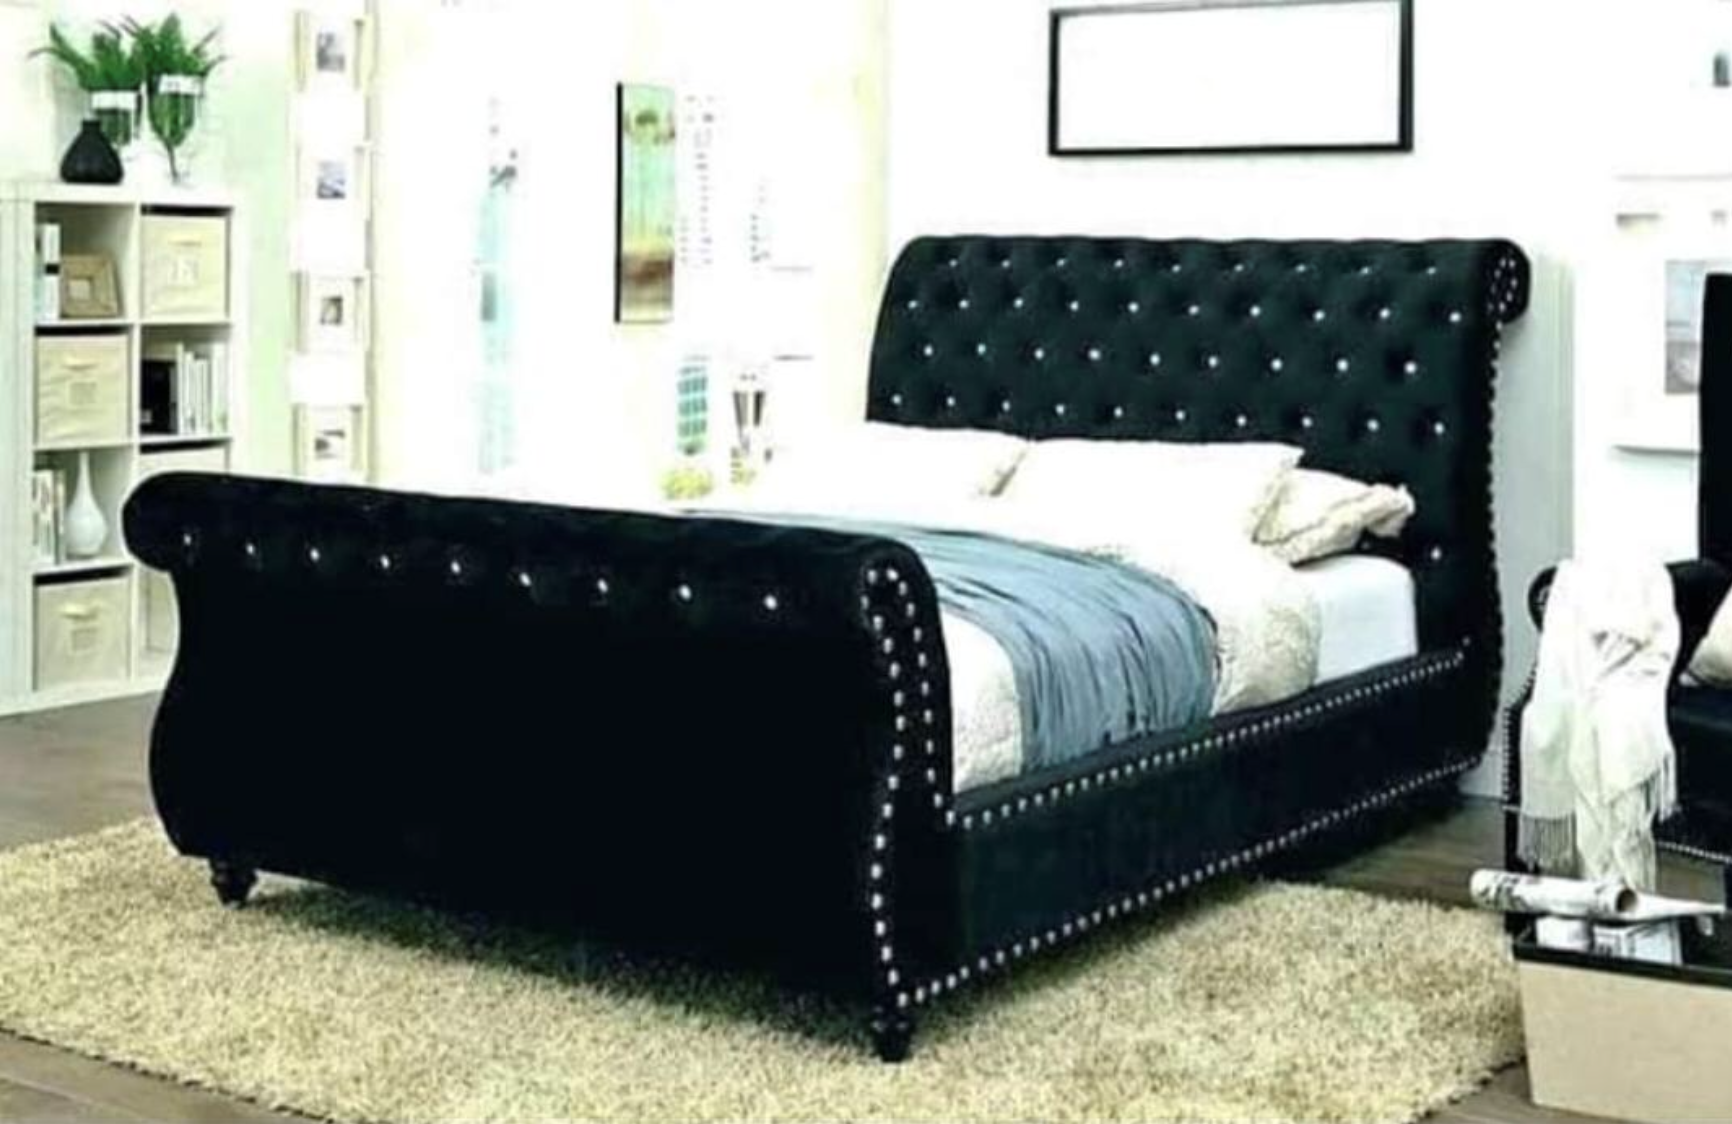 Swan Chesterfield Black Bed Available In All Colours Sizes Vary From Double King Or Super King